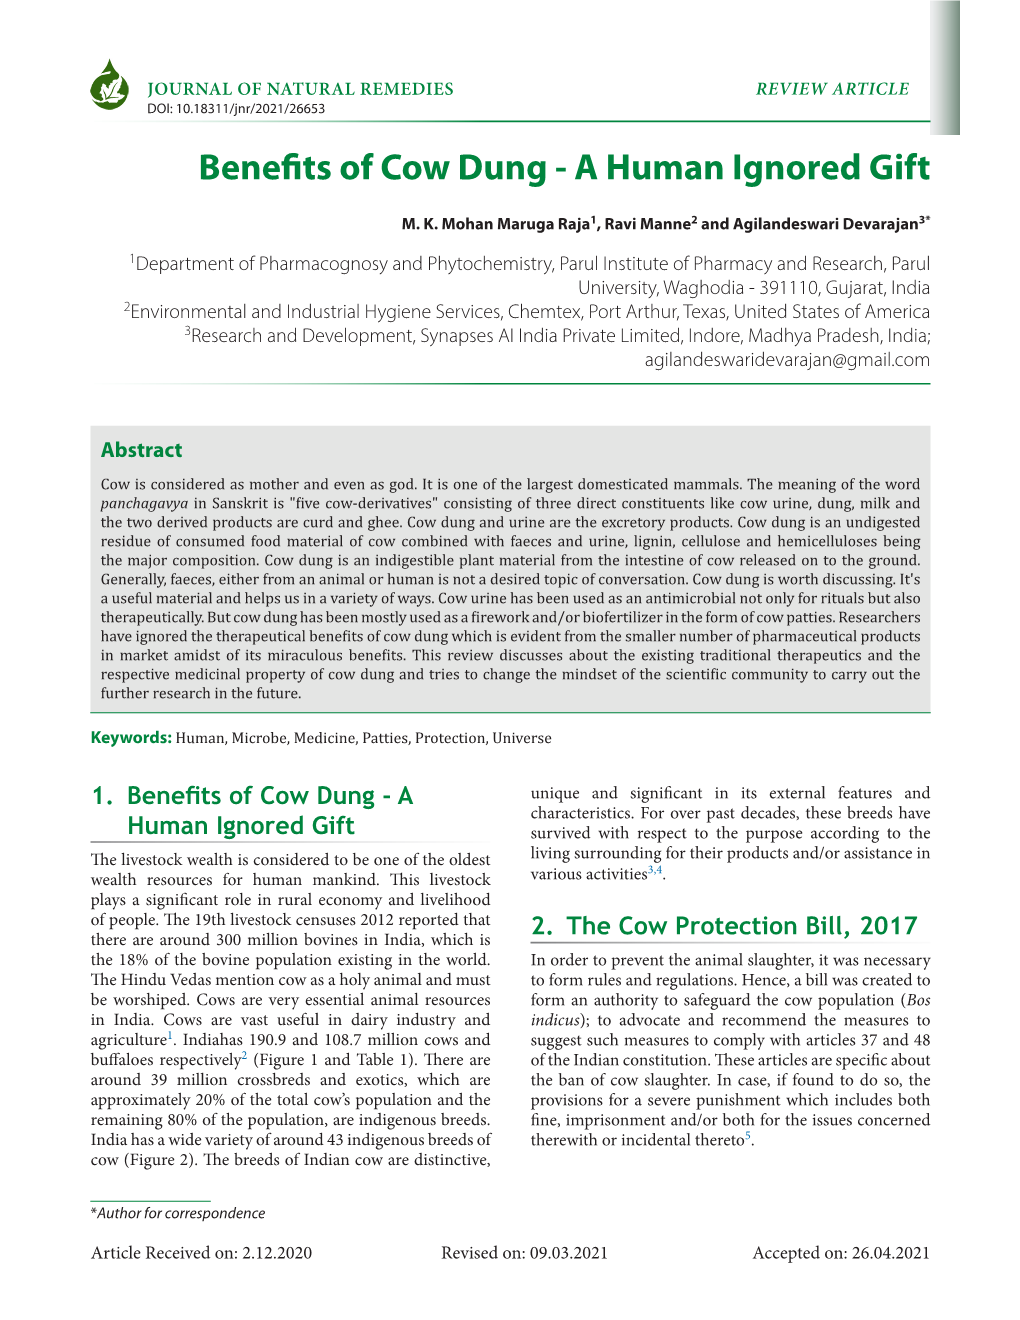 Benefits of Cow Dung - a Human Ignored Gift